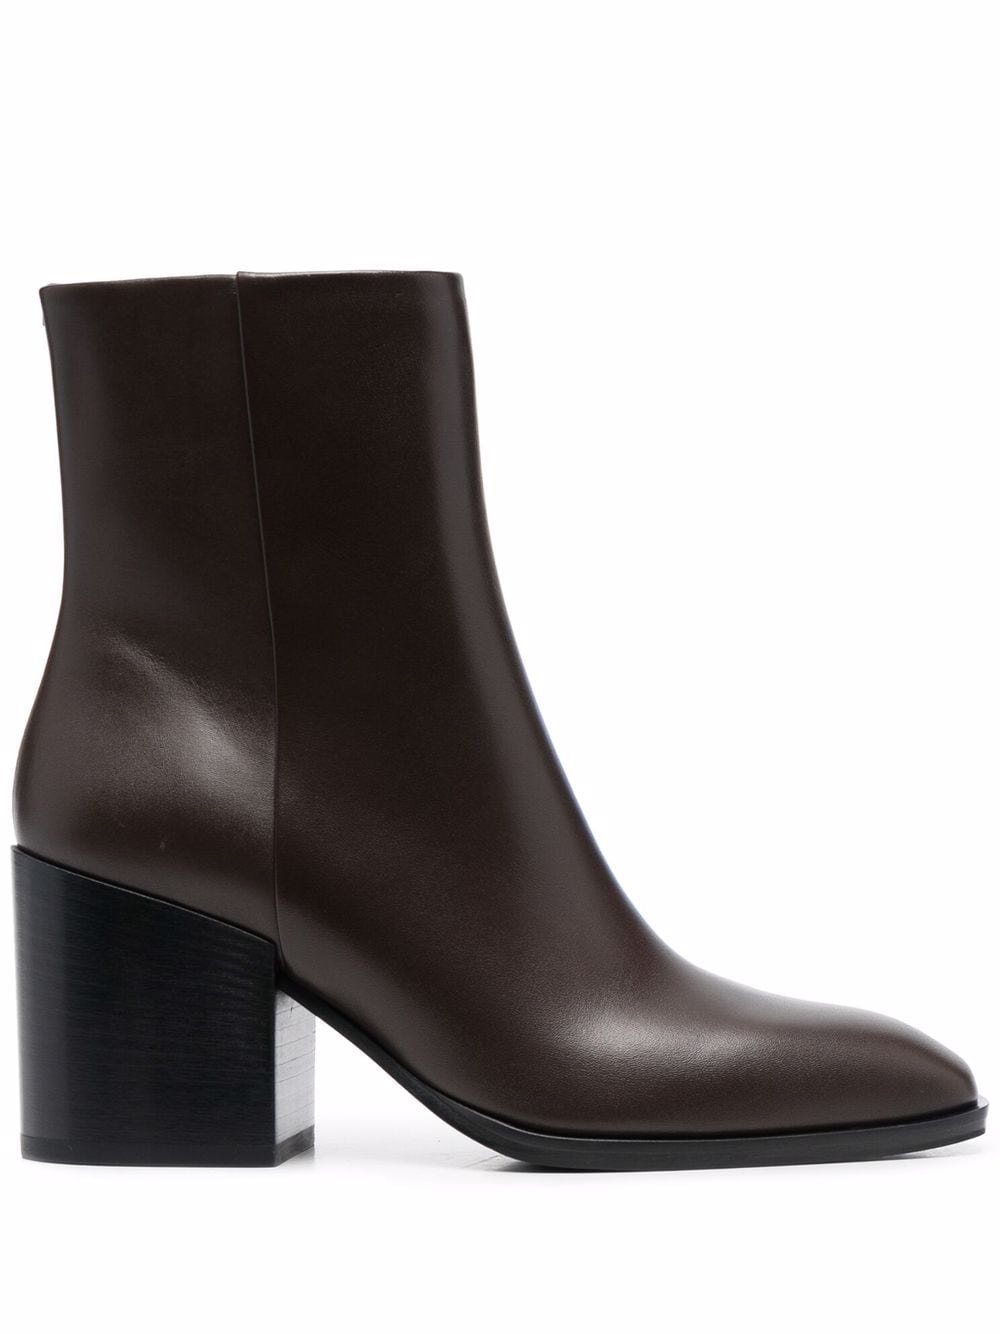 Aeyde Leandra ankle boots - Brown von Aeyde